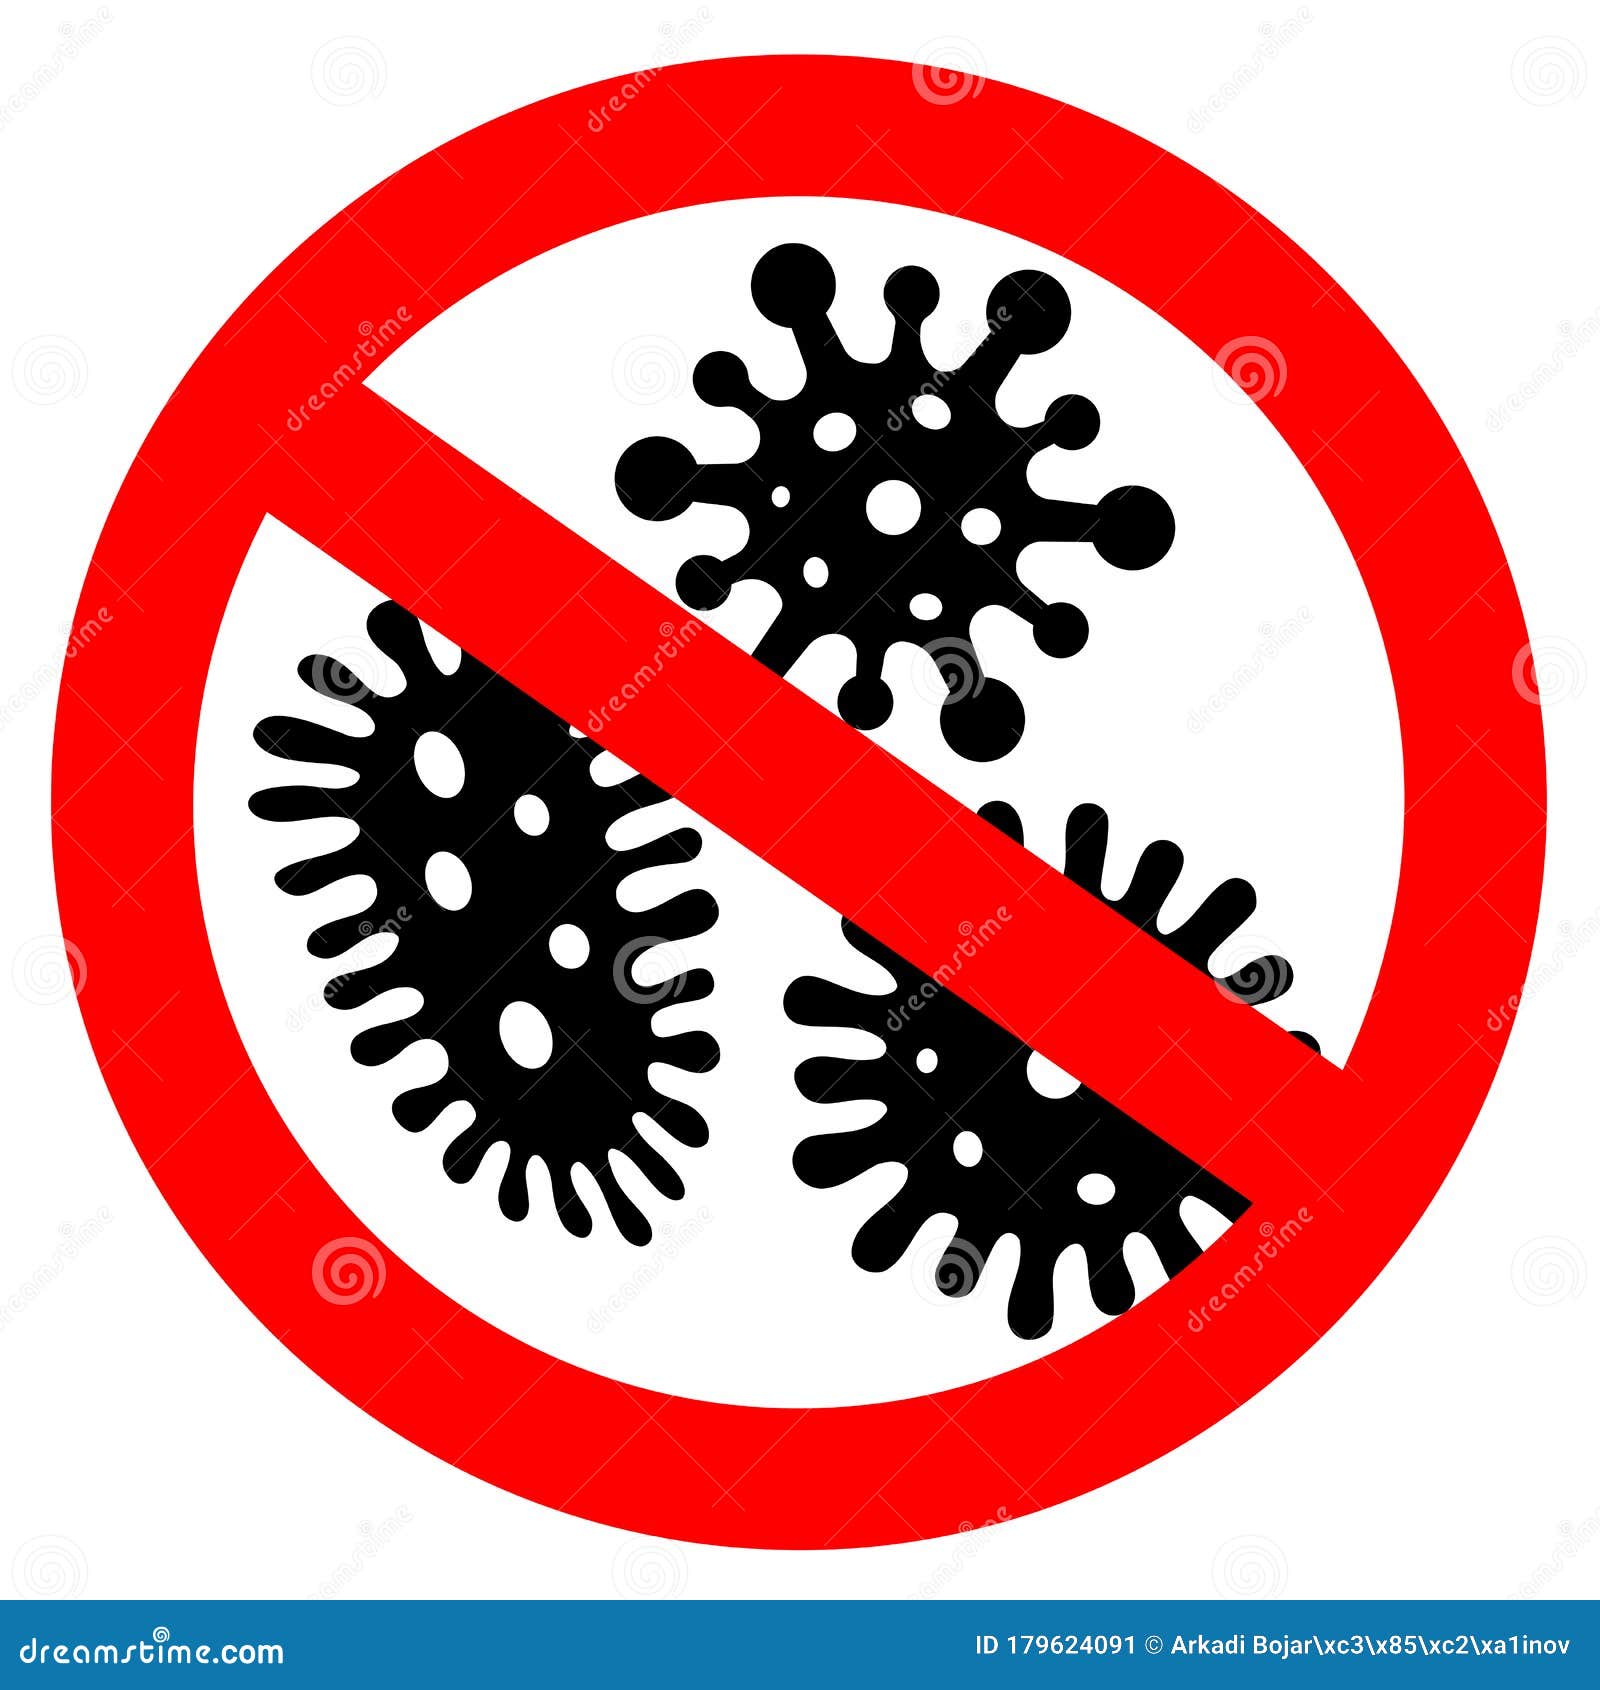  No  Germs  Stock Illustrations 103 No  Germs  Stock 